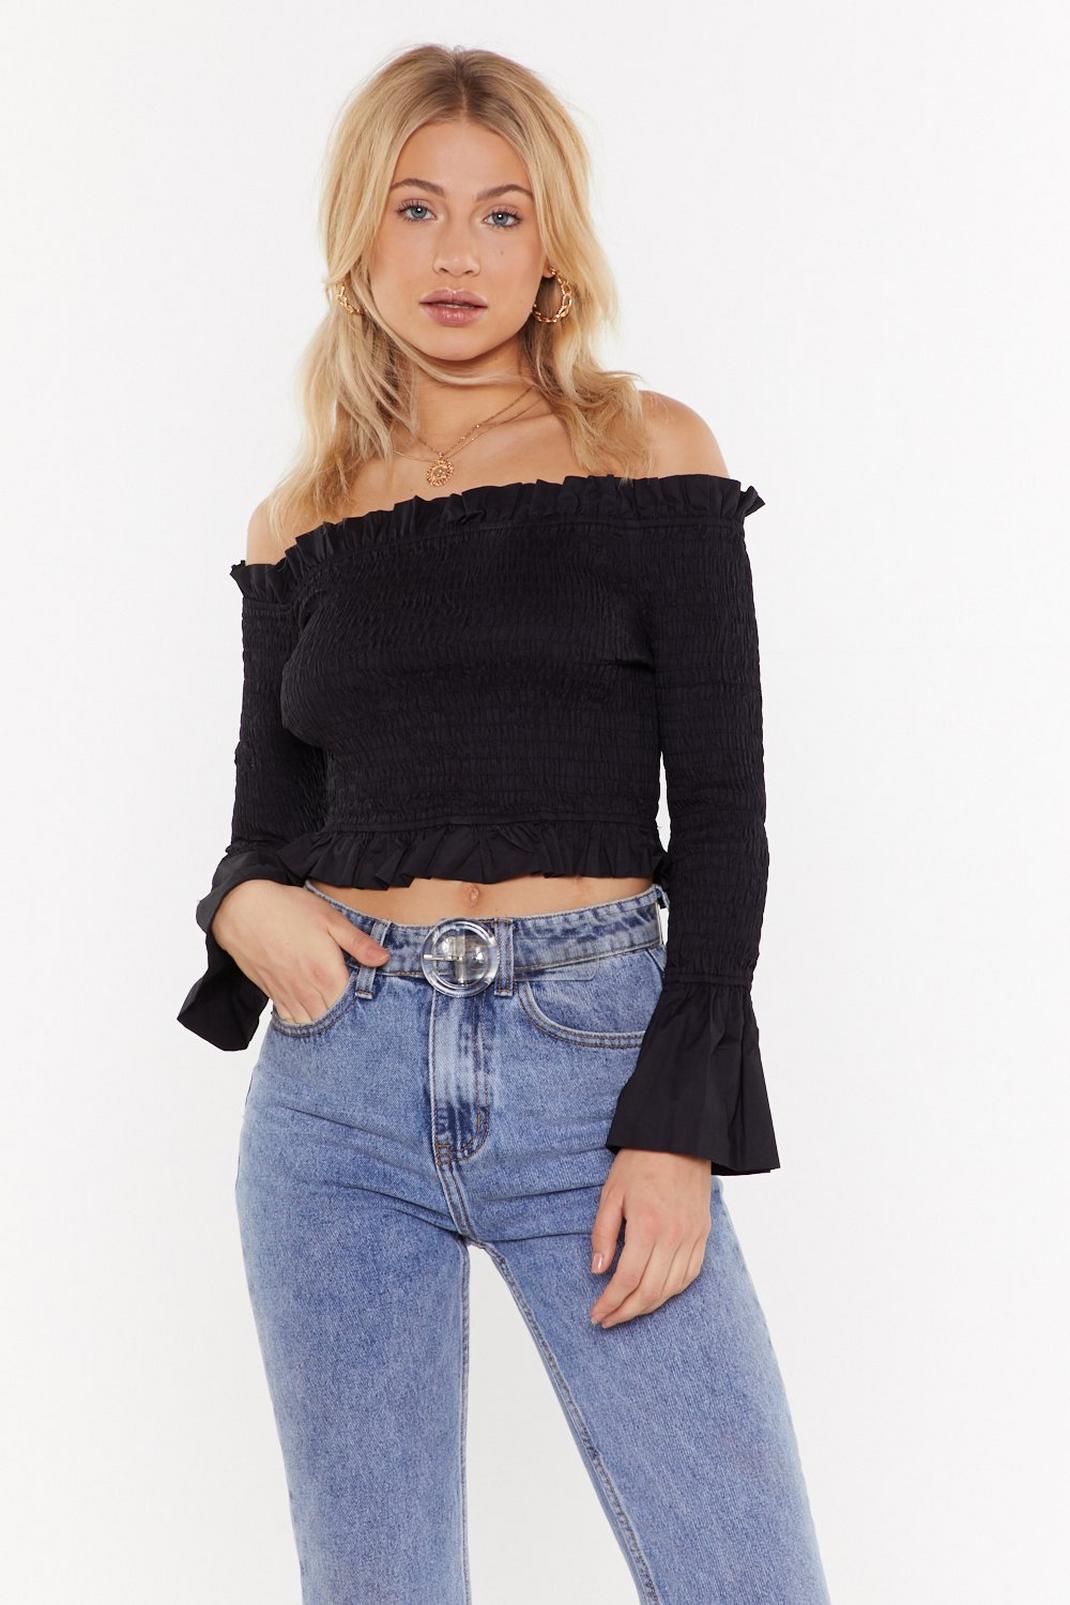 Shirr Here to Party Off-the-Shoulder Top image number 1